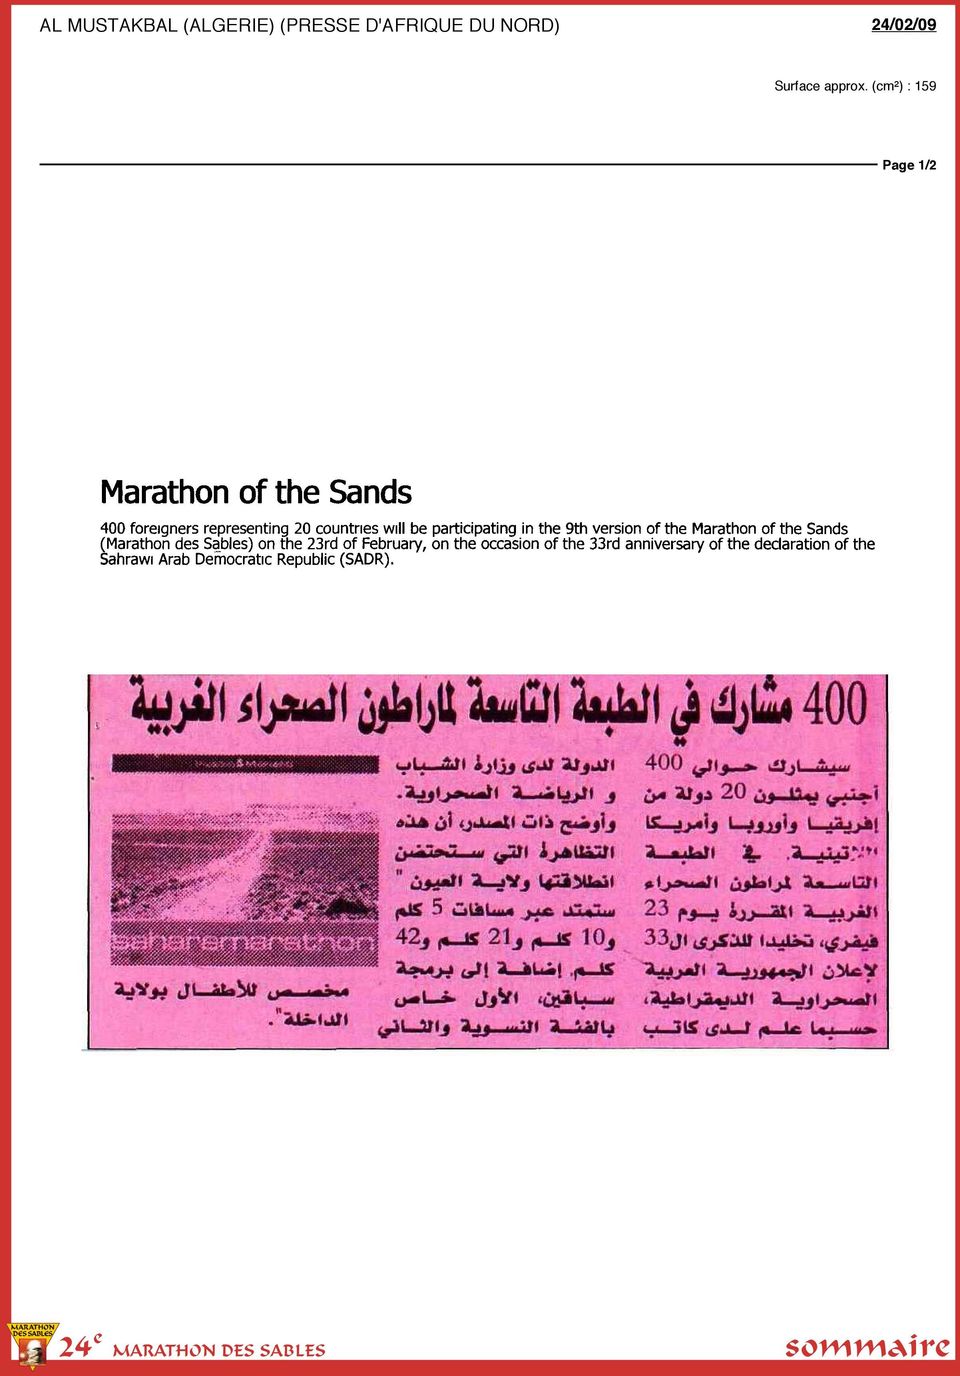 Sands (Marathon des Sables) on the 23rd of February, on the occasion of the 33rd anniversary of the declaration of the Sahrawi Arab Démocratie Republic (SAUR).